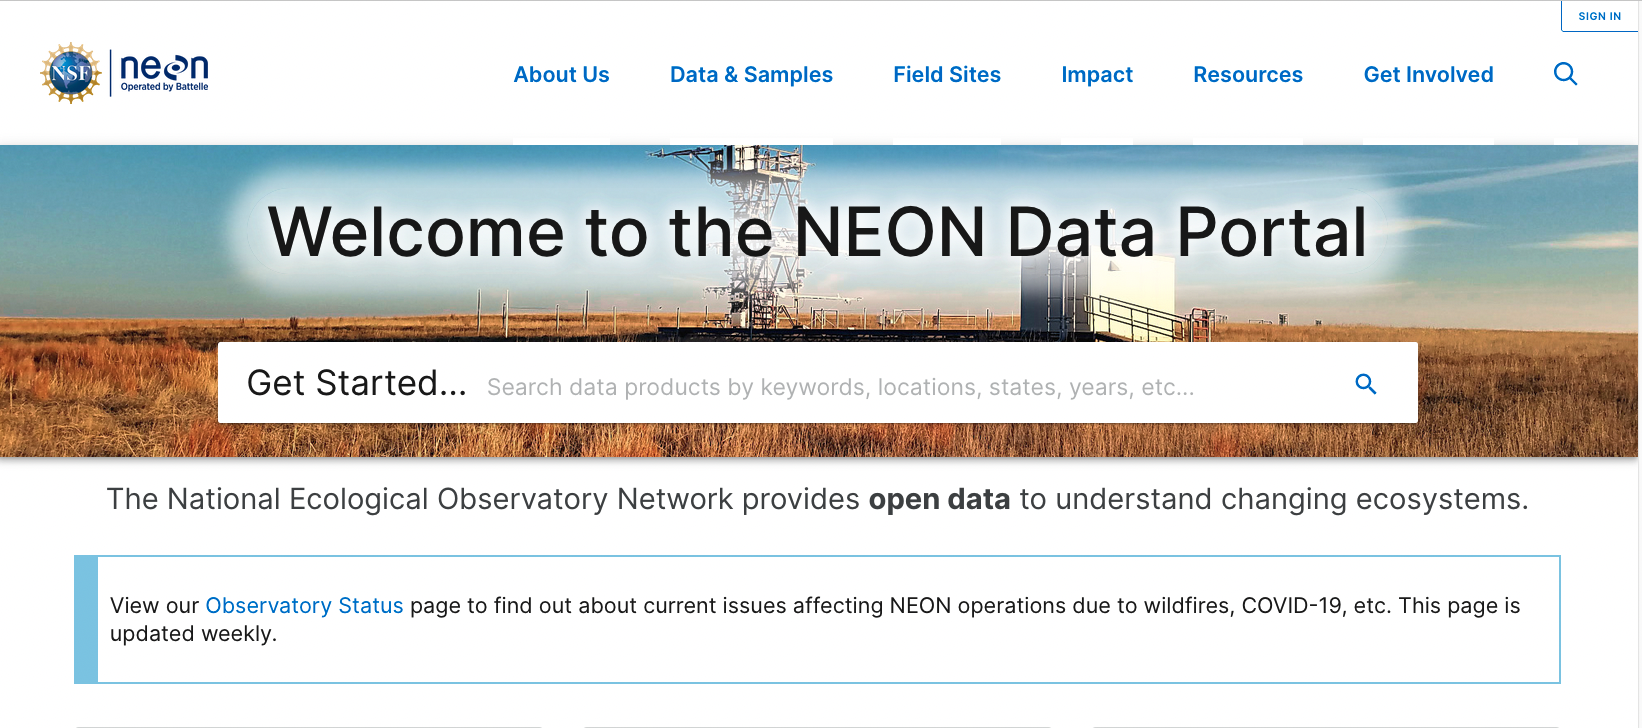 NEON Data Portal Front Page.